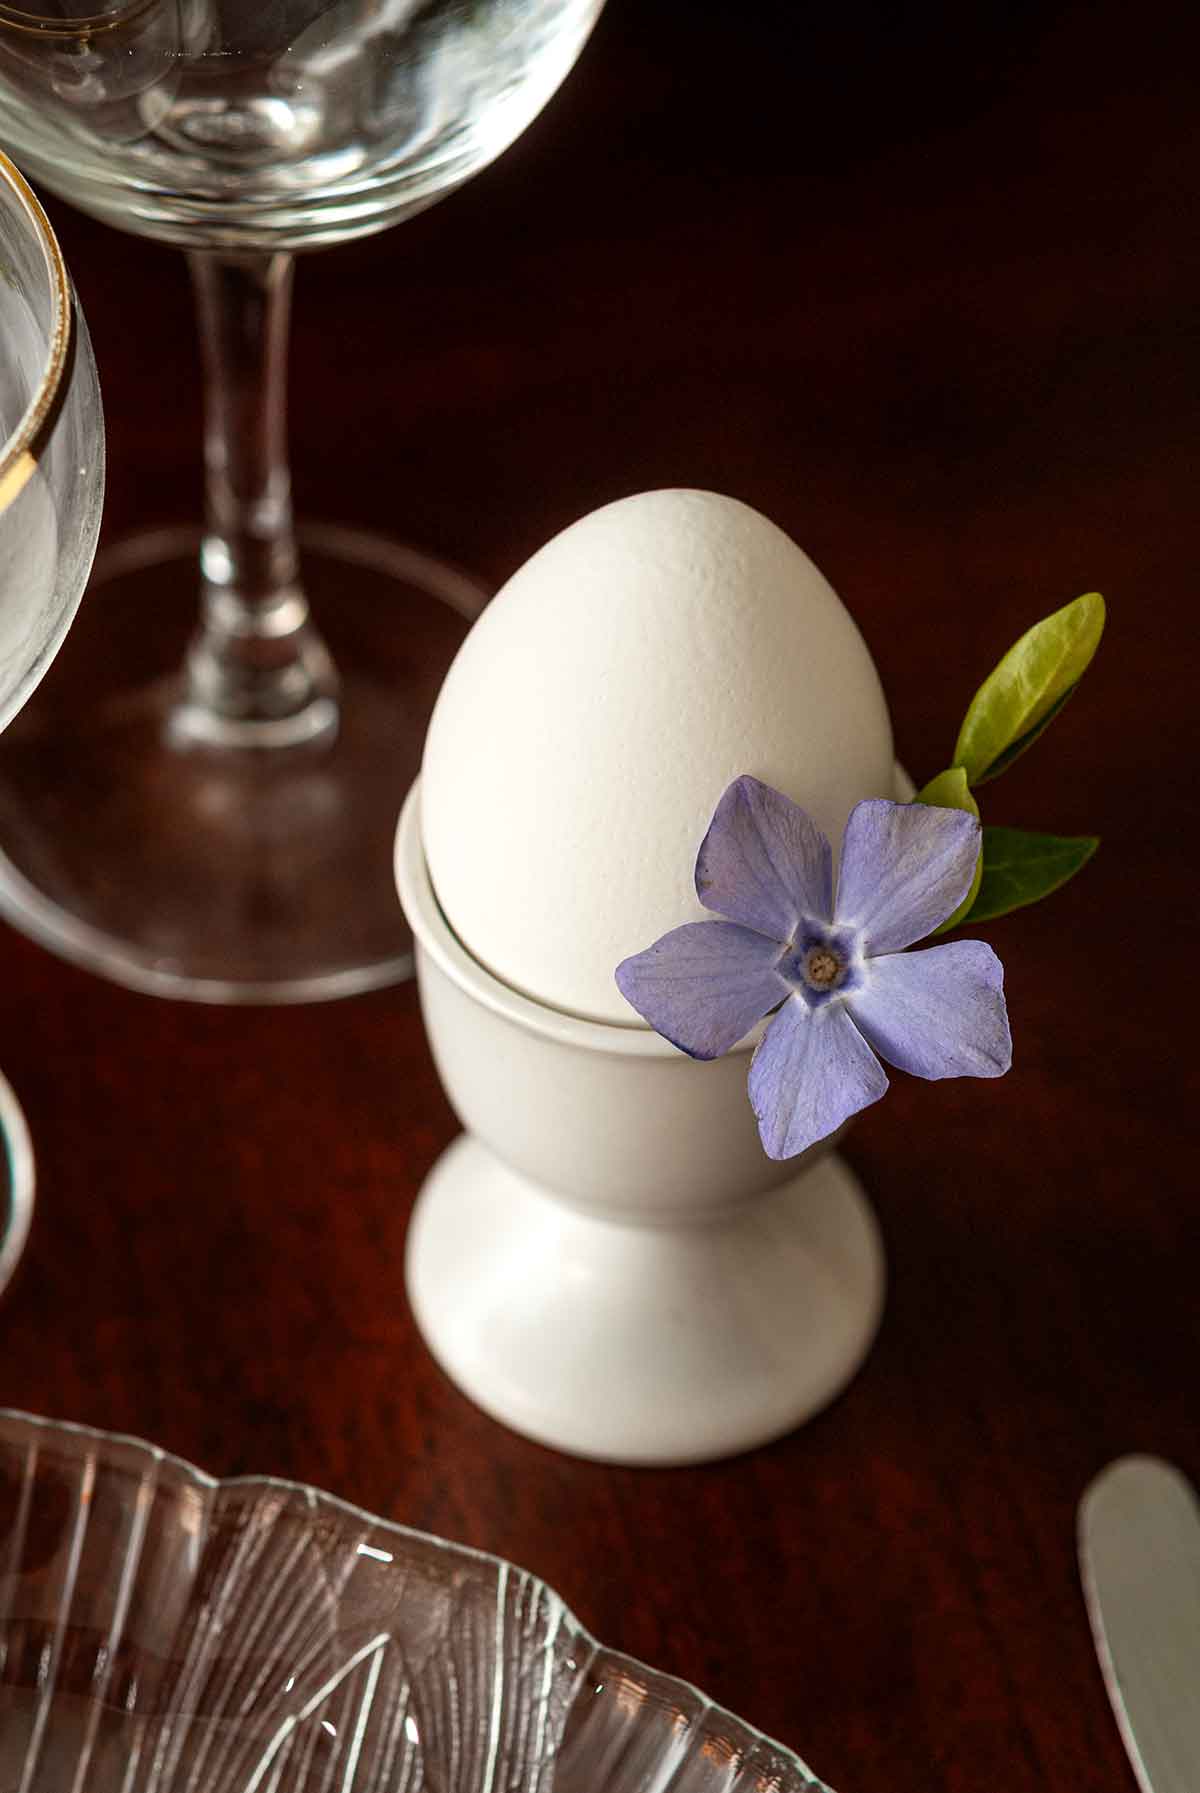 An egg in an egg cup with a flower tucked in the cup.